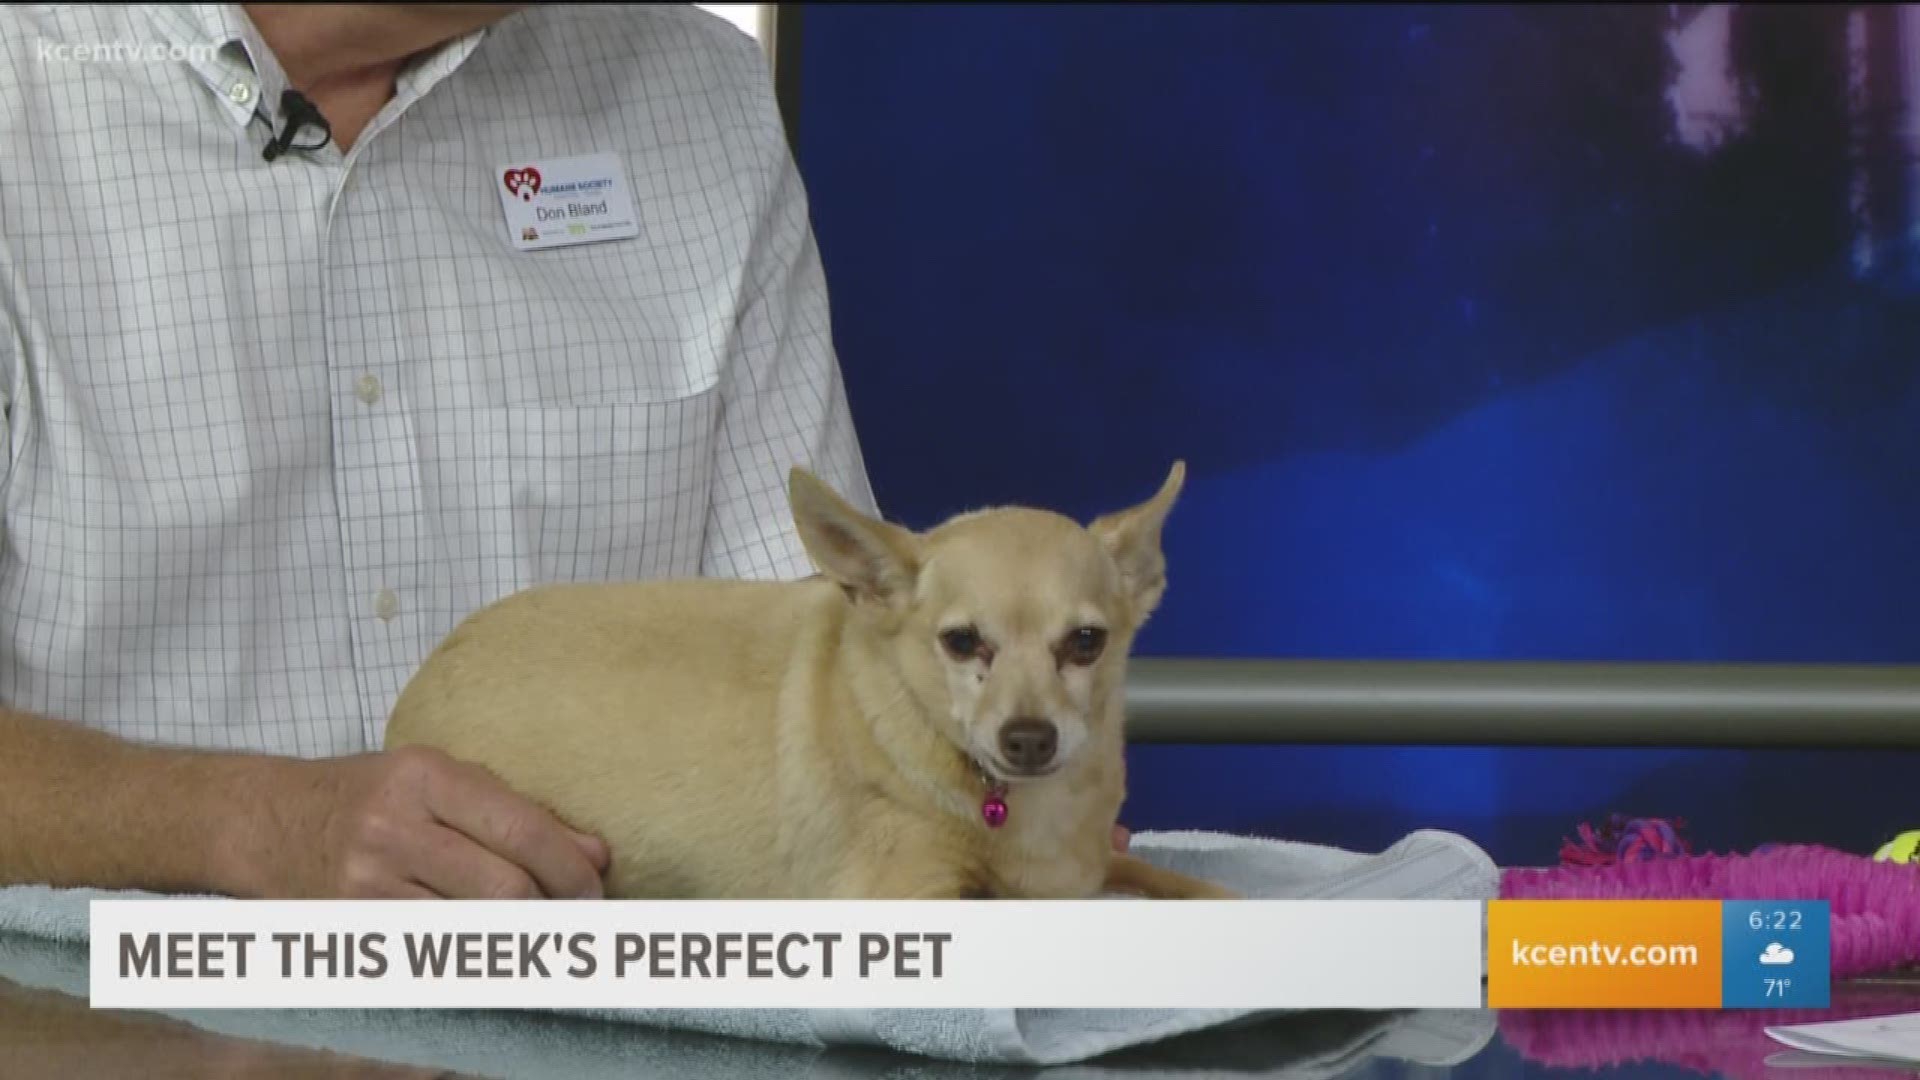 Meet this week's perfect pet Noah. You can adopt him from the Humane Society of Central Texas.